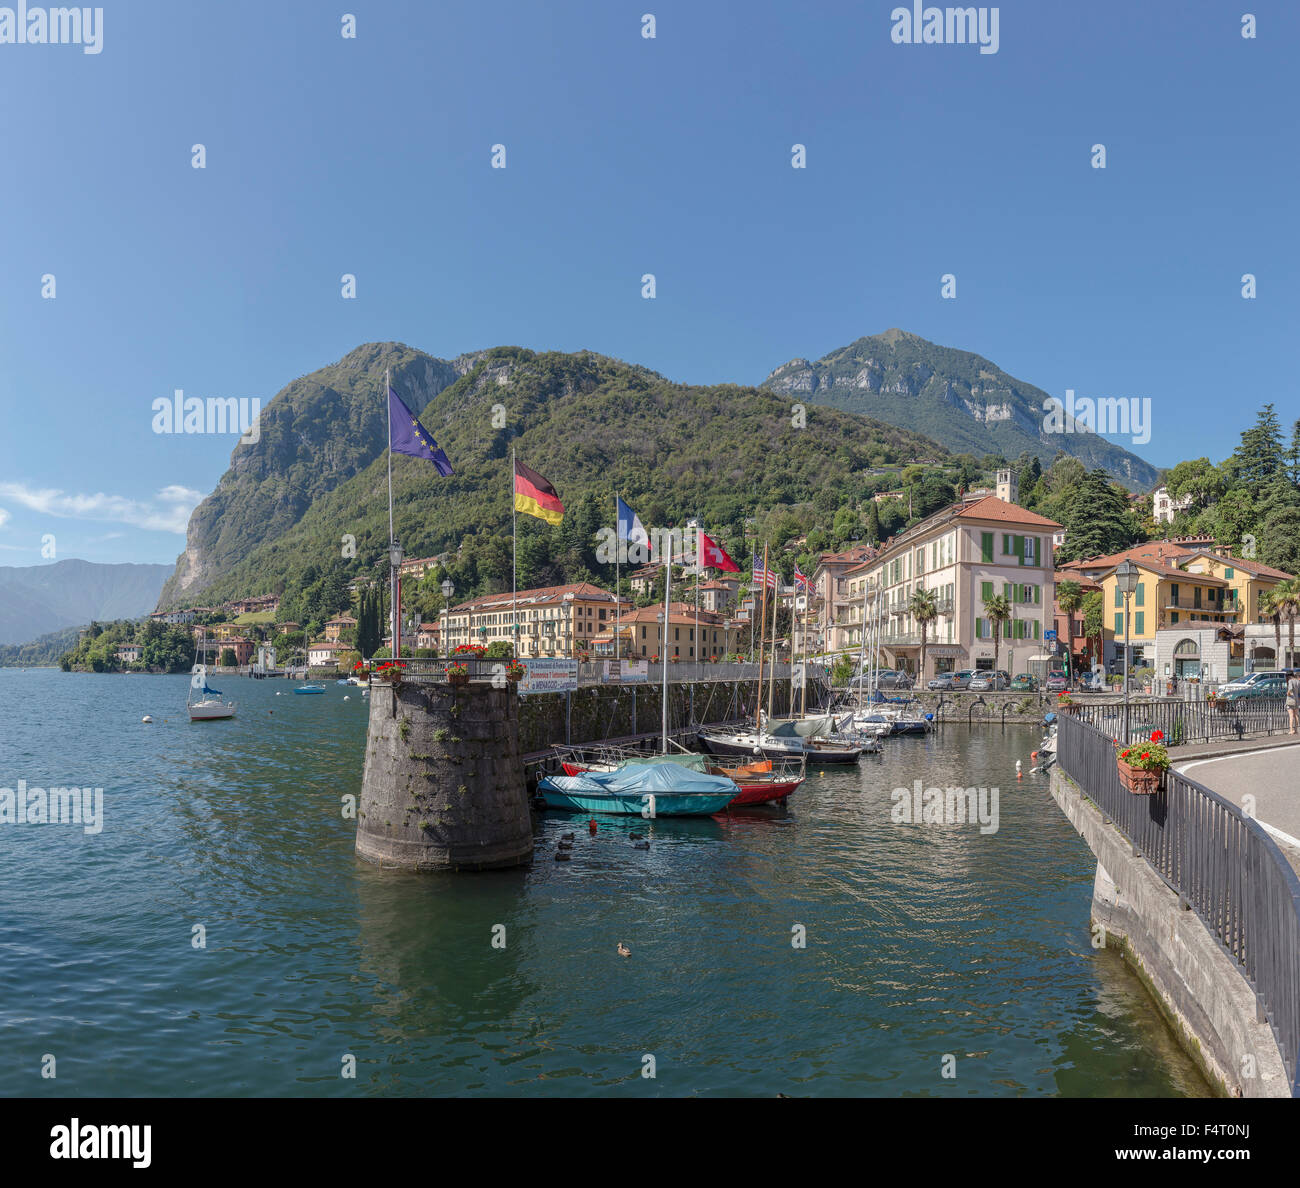 Italy, Europe, Menaggio, Lombardy, Little port, Lake Como, city, water, summer, mountains, lake, ships, boat, Stock Photo